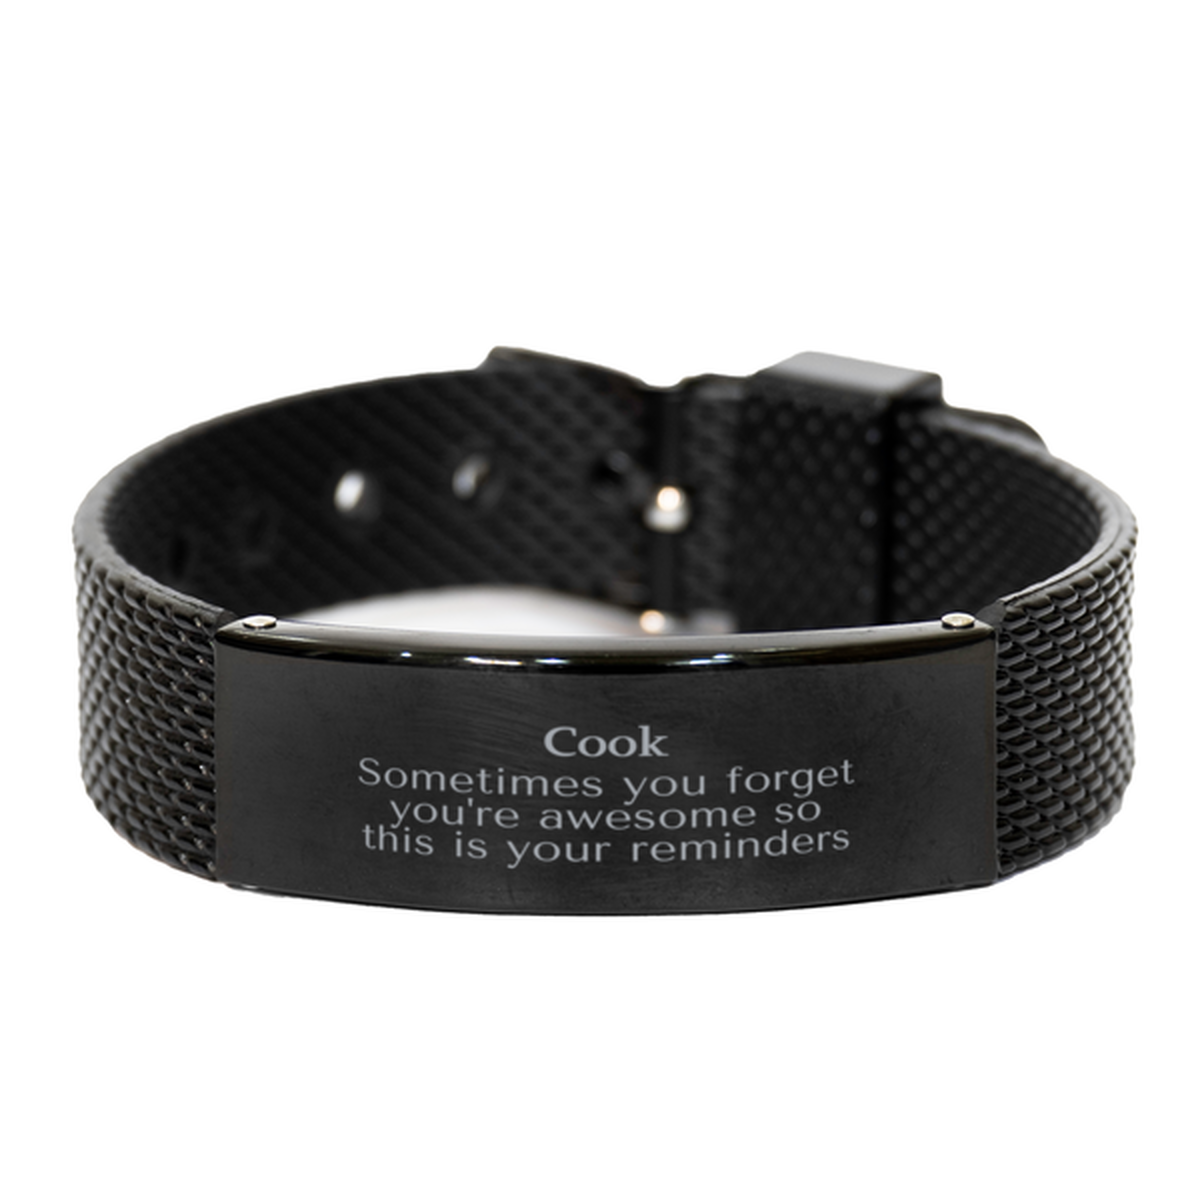 Sentimental Cook Black Shark Mesh Bracelet, Cook Sometimes you forget you're awesome so this is your reminders, Graduation Christmas Birthday Gifts for Cook, Men, Women, Coworkers